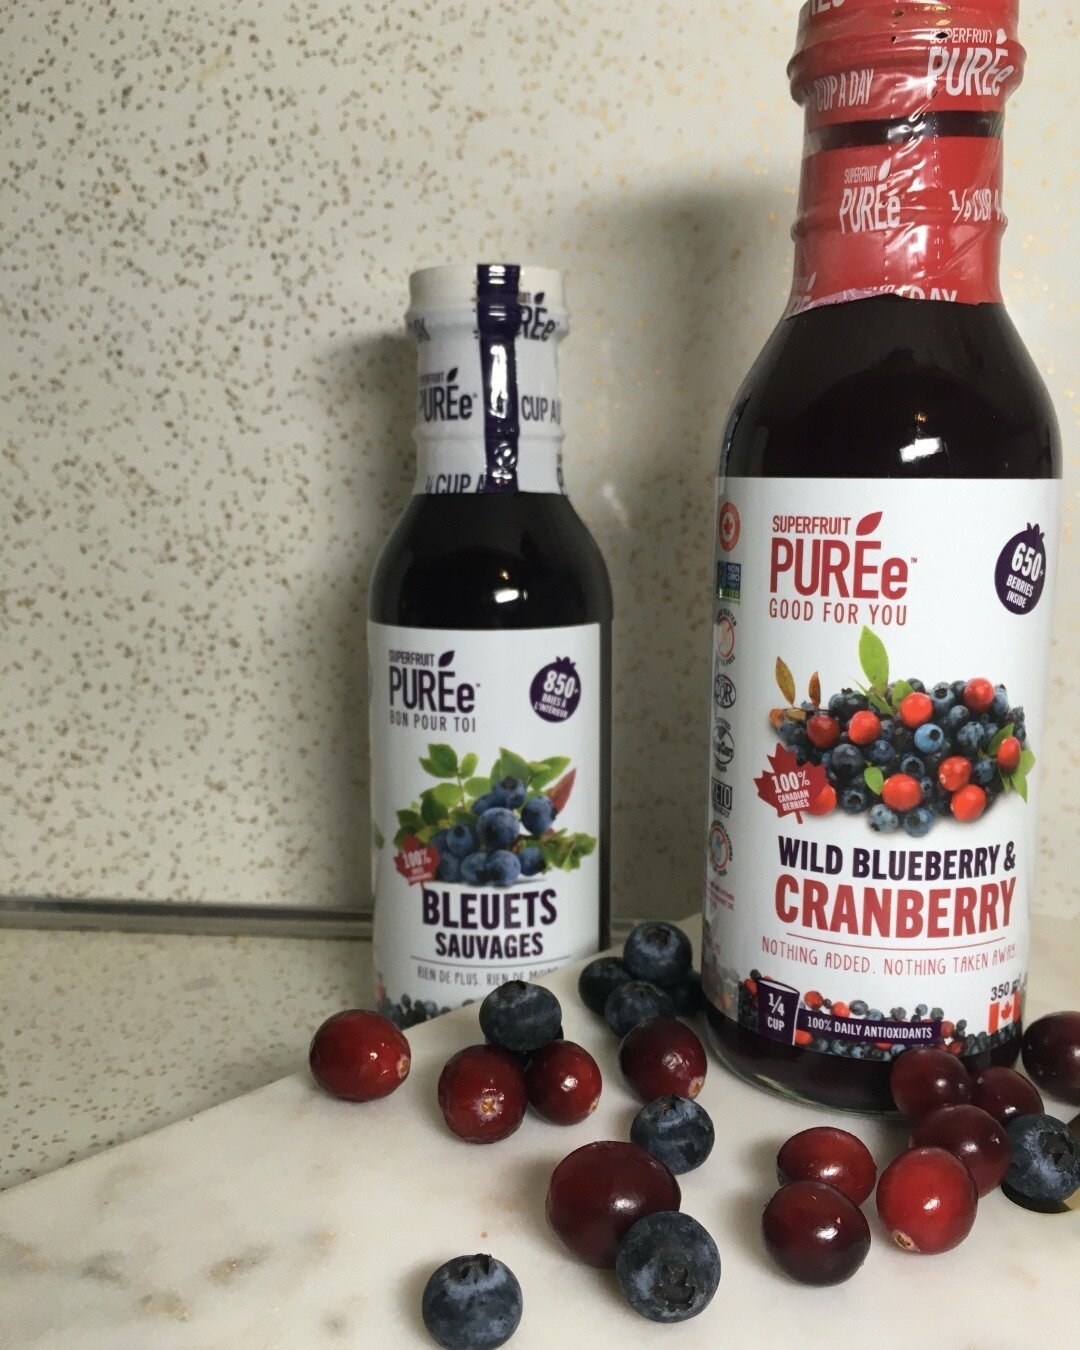 📝The daily task list in the life of a bottle of Superfruit Pur&eacute;e:

✔️Provide human with daily antioxidant requirement
✔️Battle with the free radicals in human&rsquo;s body
✔️Protect human from diseases and oxidative stress
✔️Boost humans brai